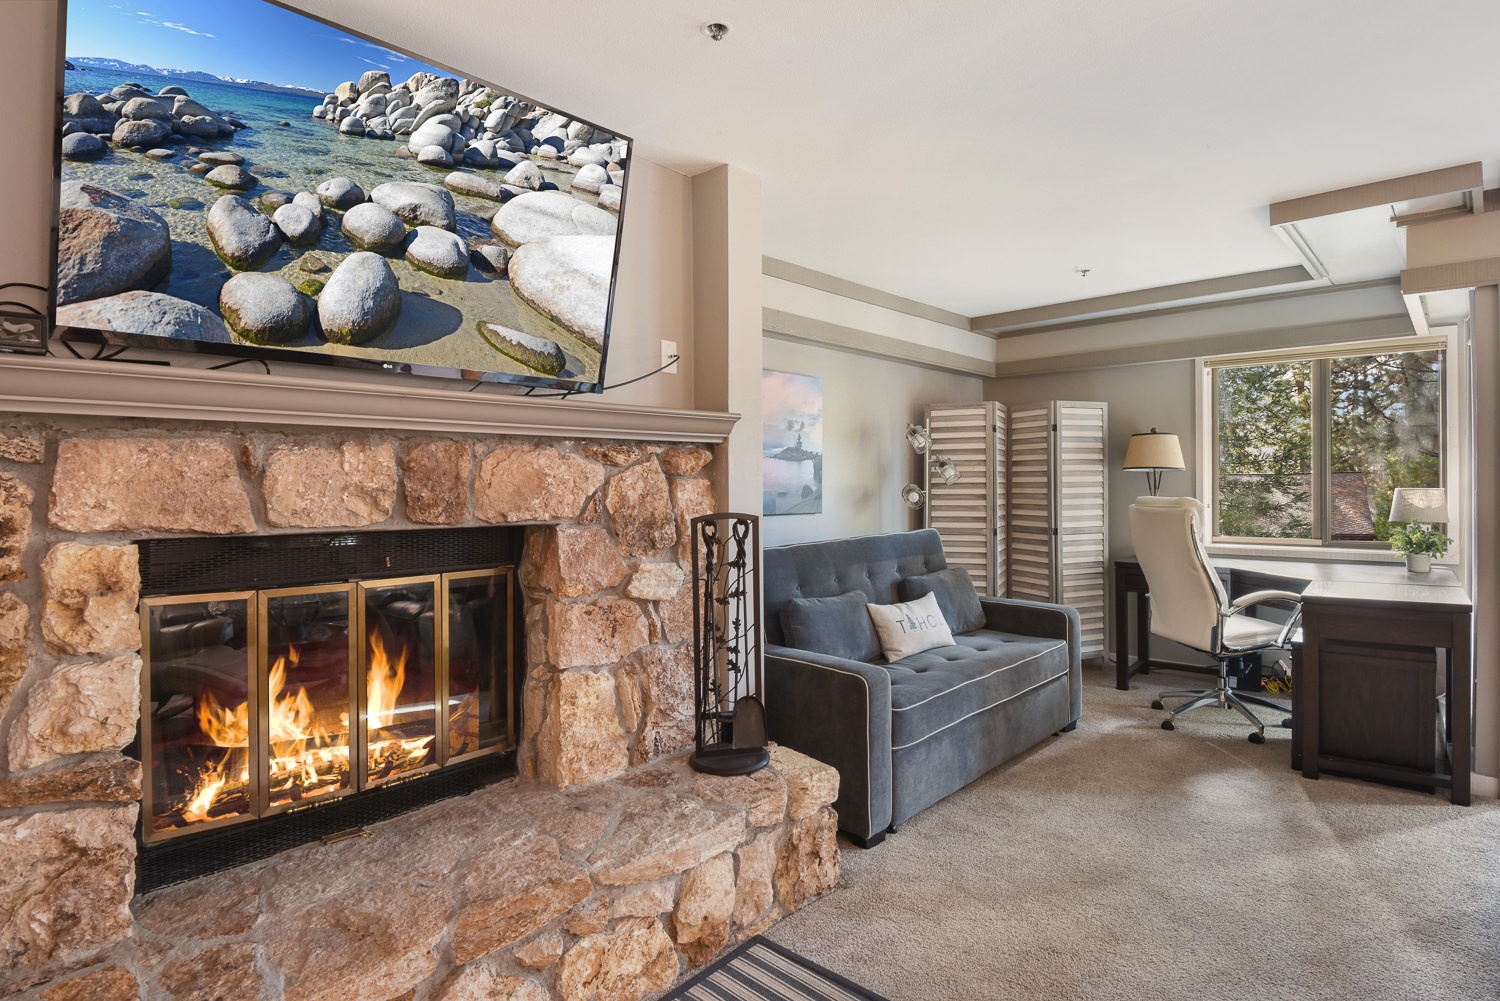 Wood fireplace and Smart TV